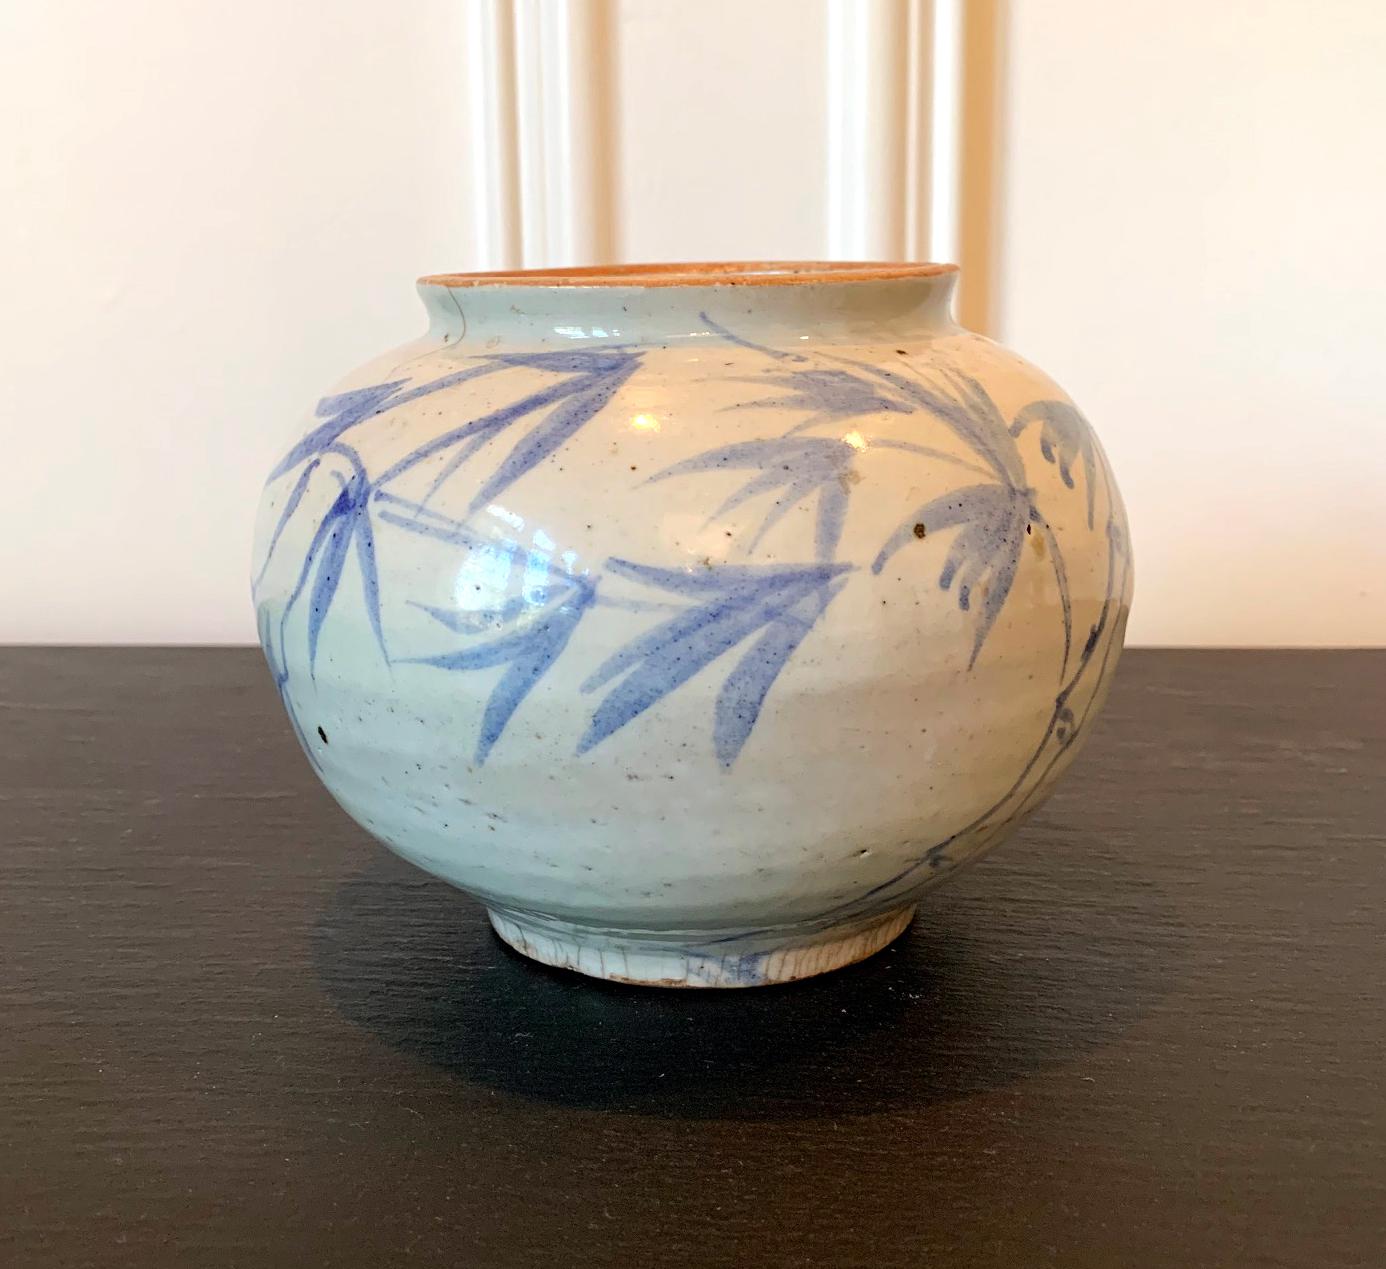 This Korean ceramic storage jar is dated to late Joseon or Yi dynasty, circa 19th century. It has a Classic rounded form with a short mouth lip and base ring, slightly irregular from the potter's wheel, yet it presents a quiet majestic energy. Under